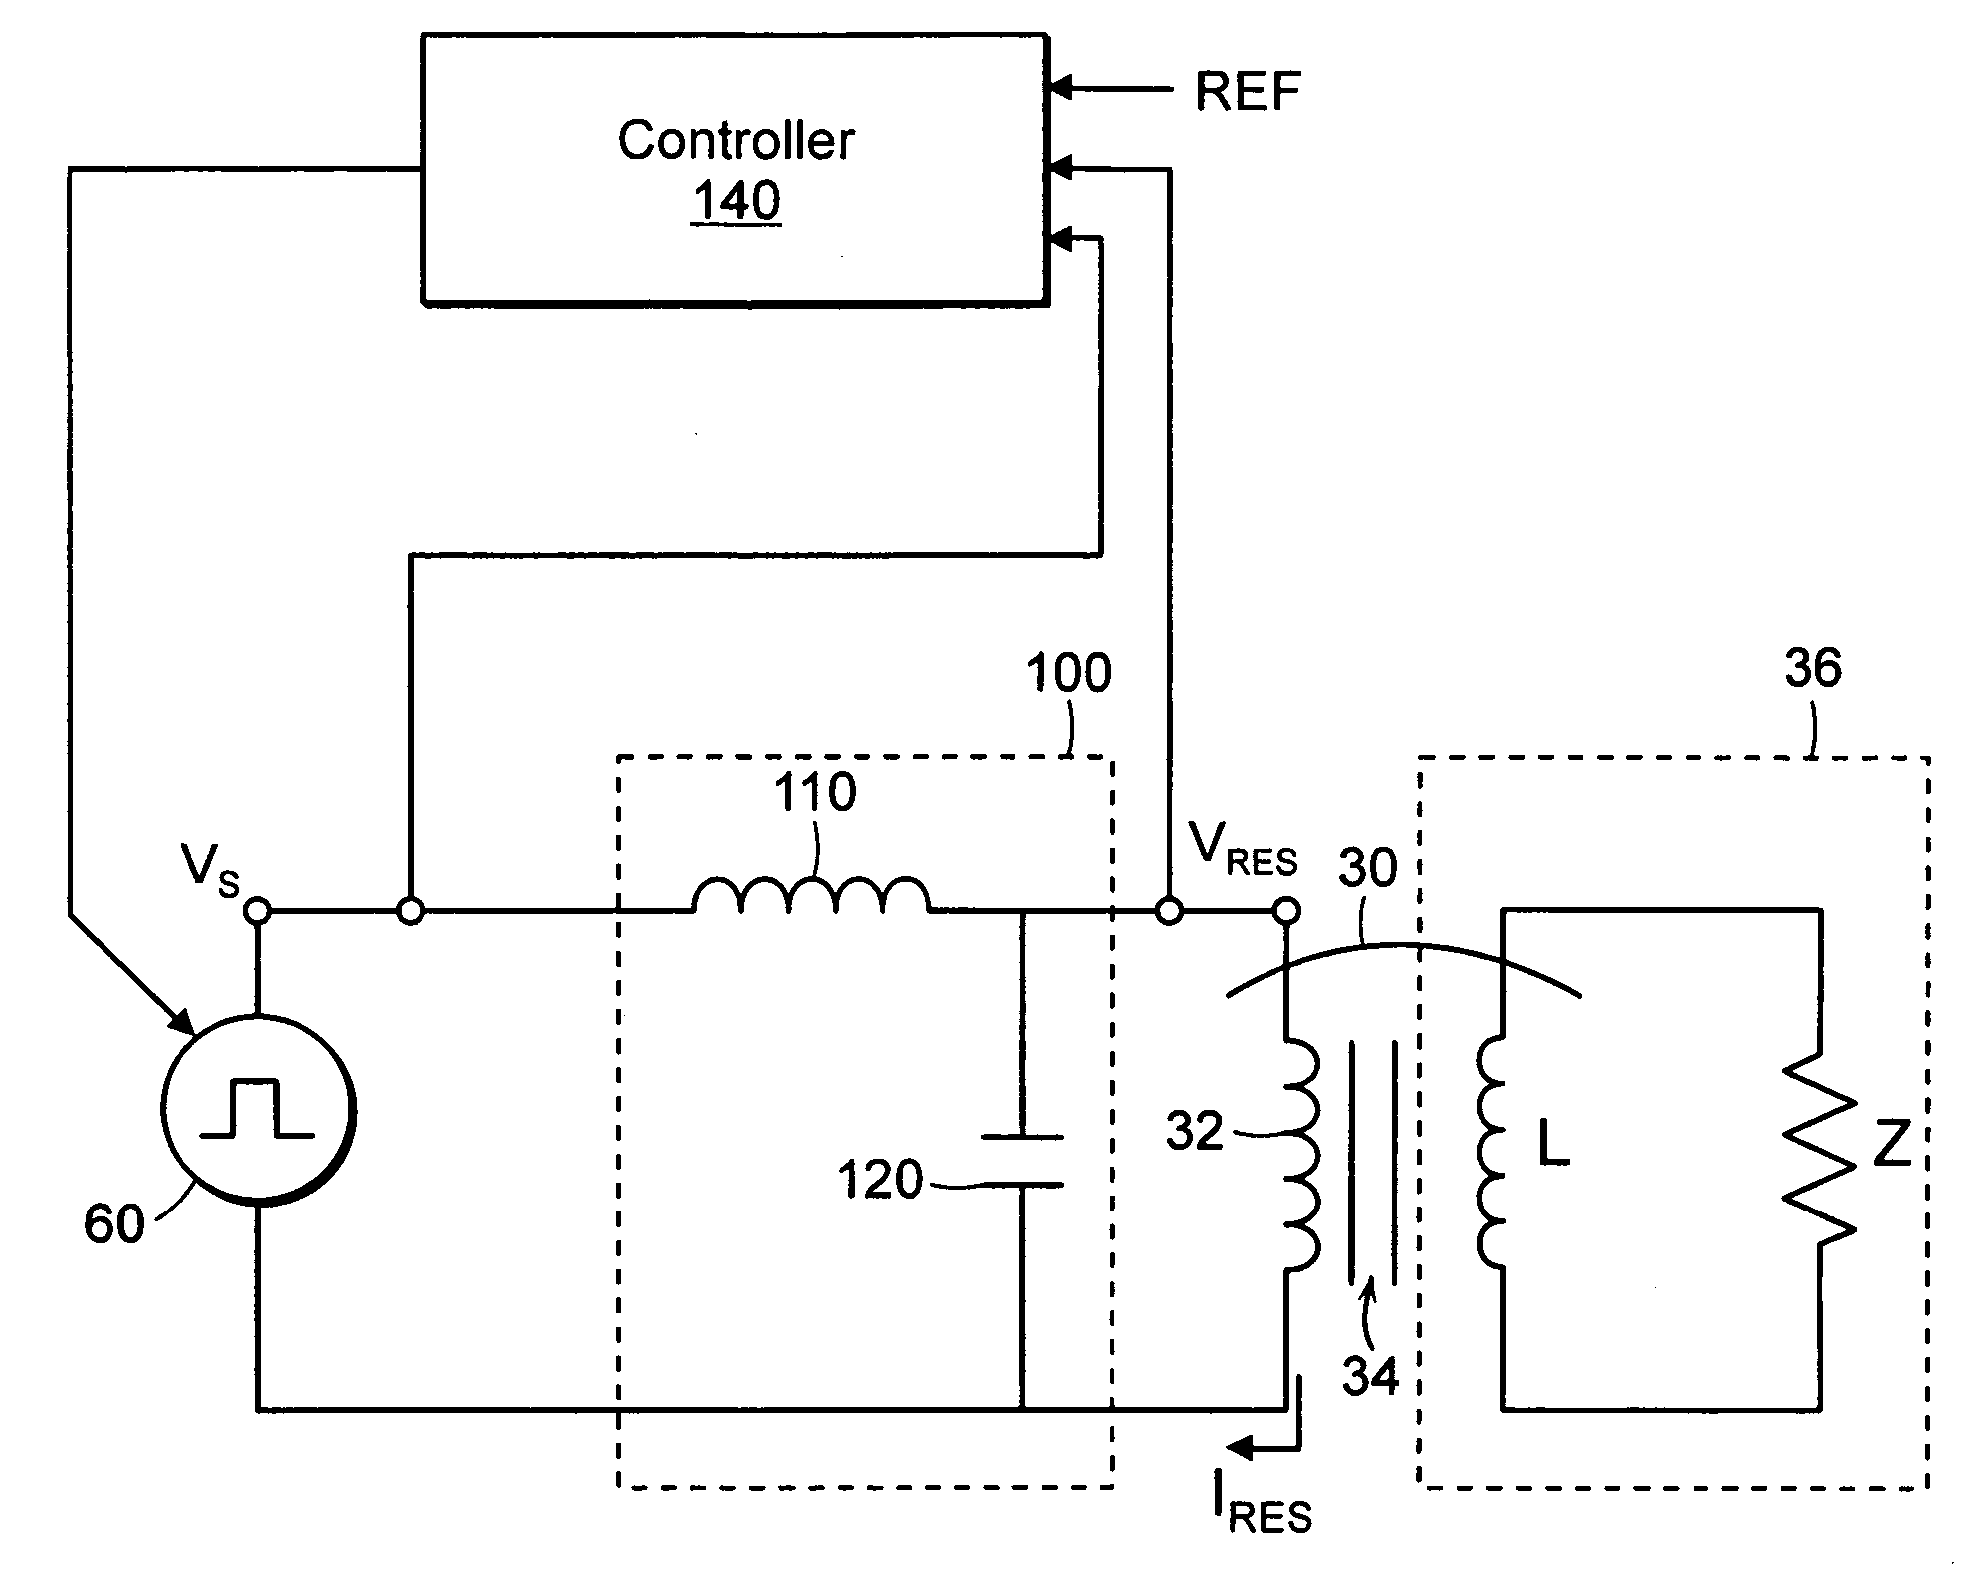 Method and apparatus of providing power to ignite and sustain a plasma in a reactive gas generator